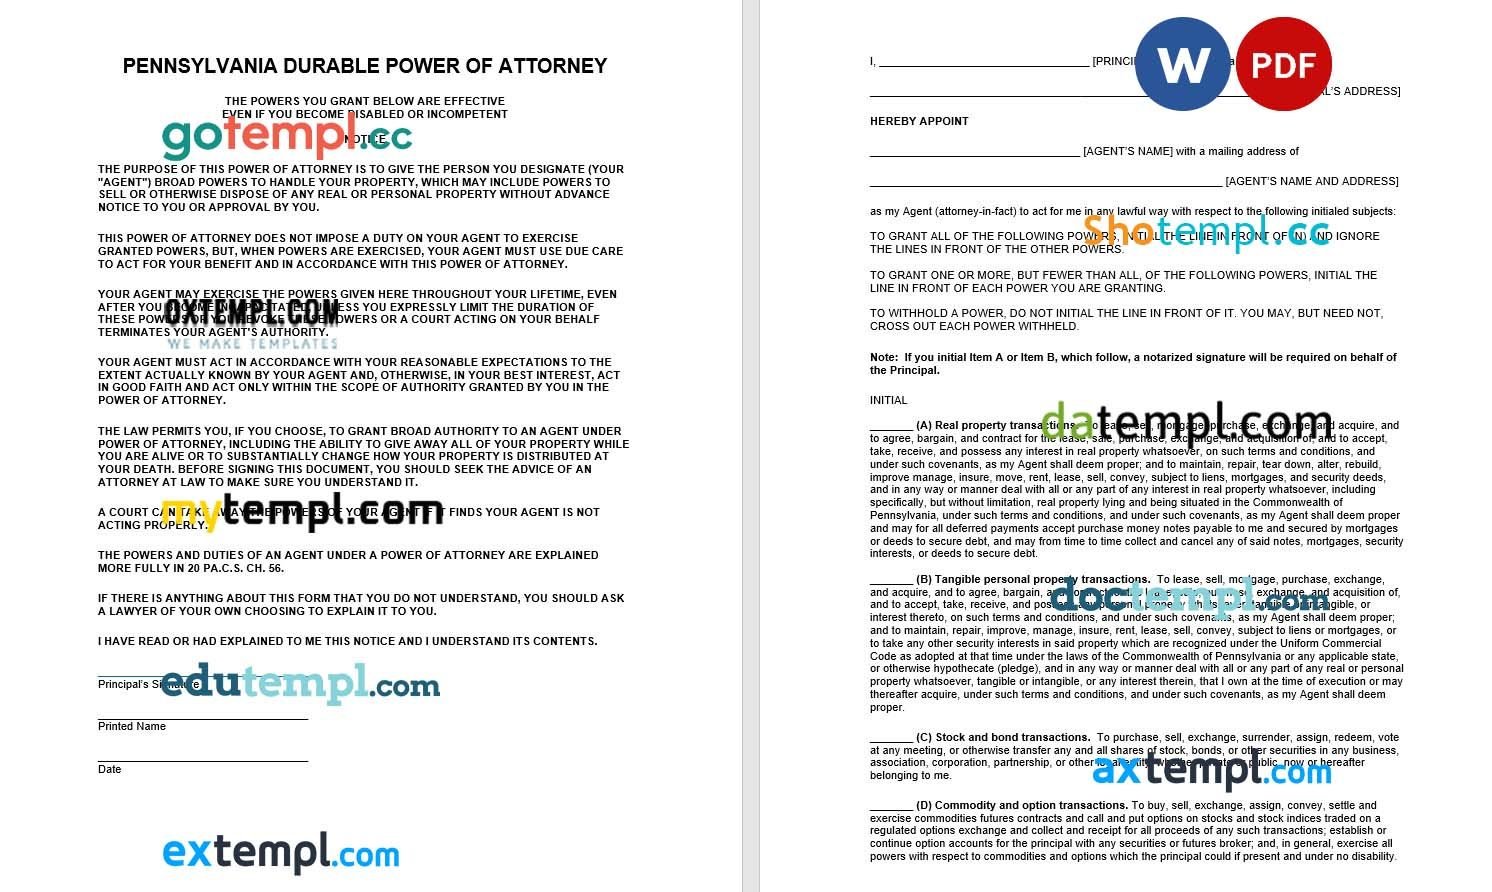 Pennsylvania Durable Financial Power of Attorney Form example, fully editable